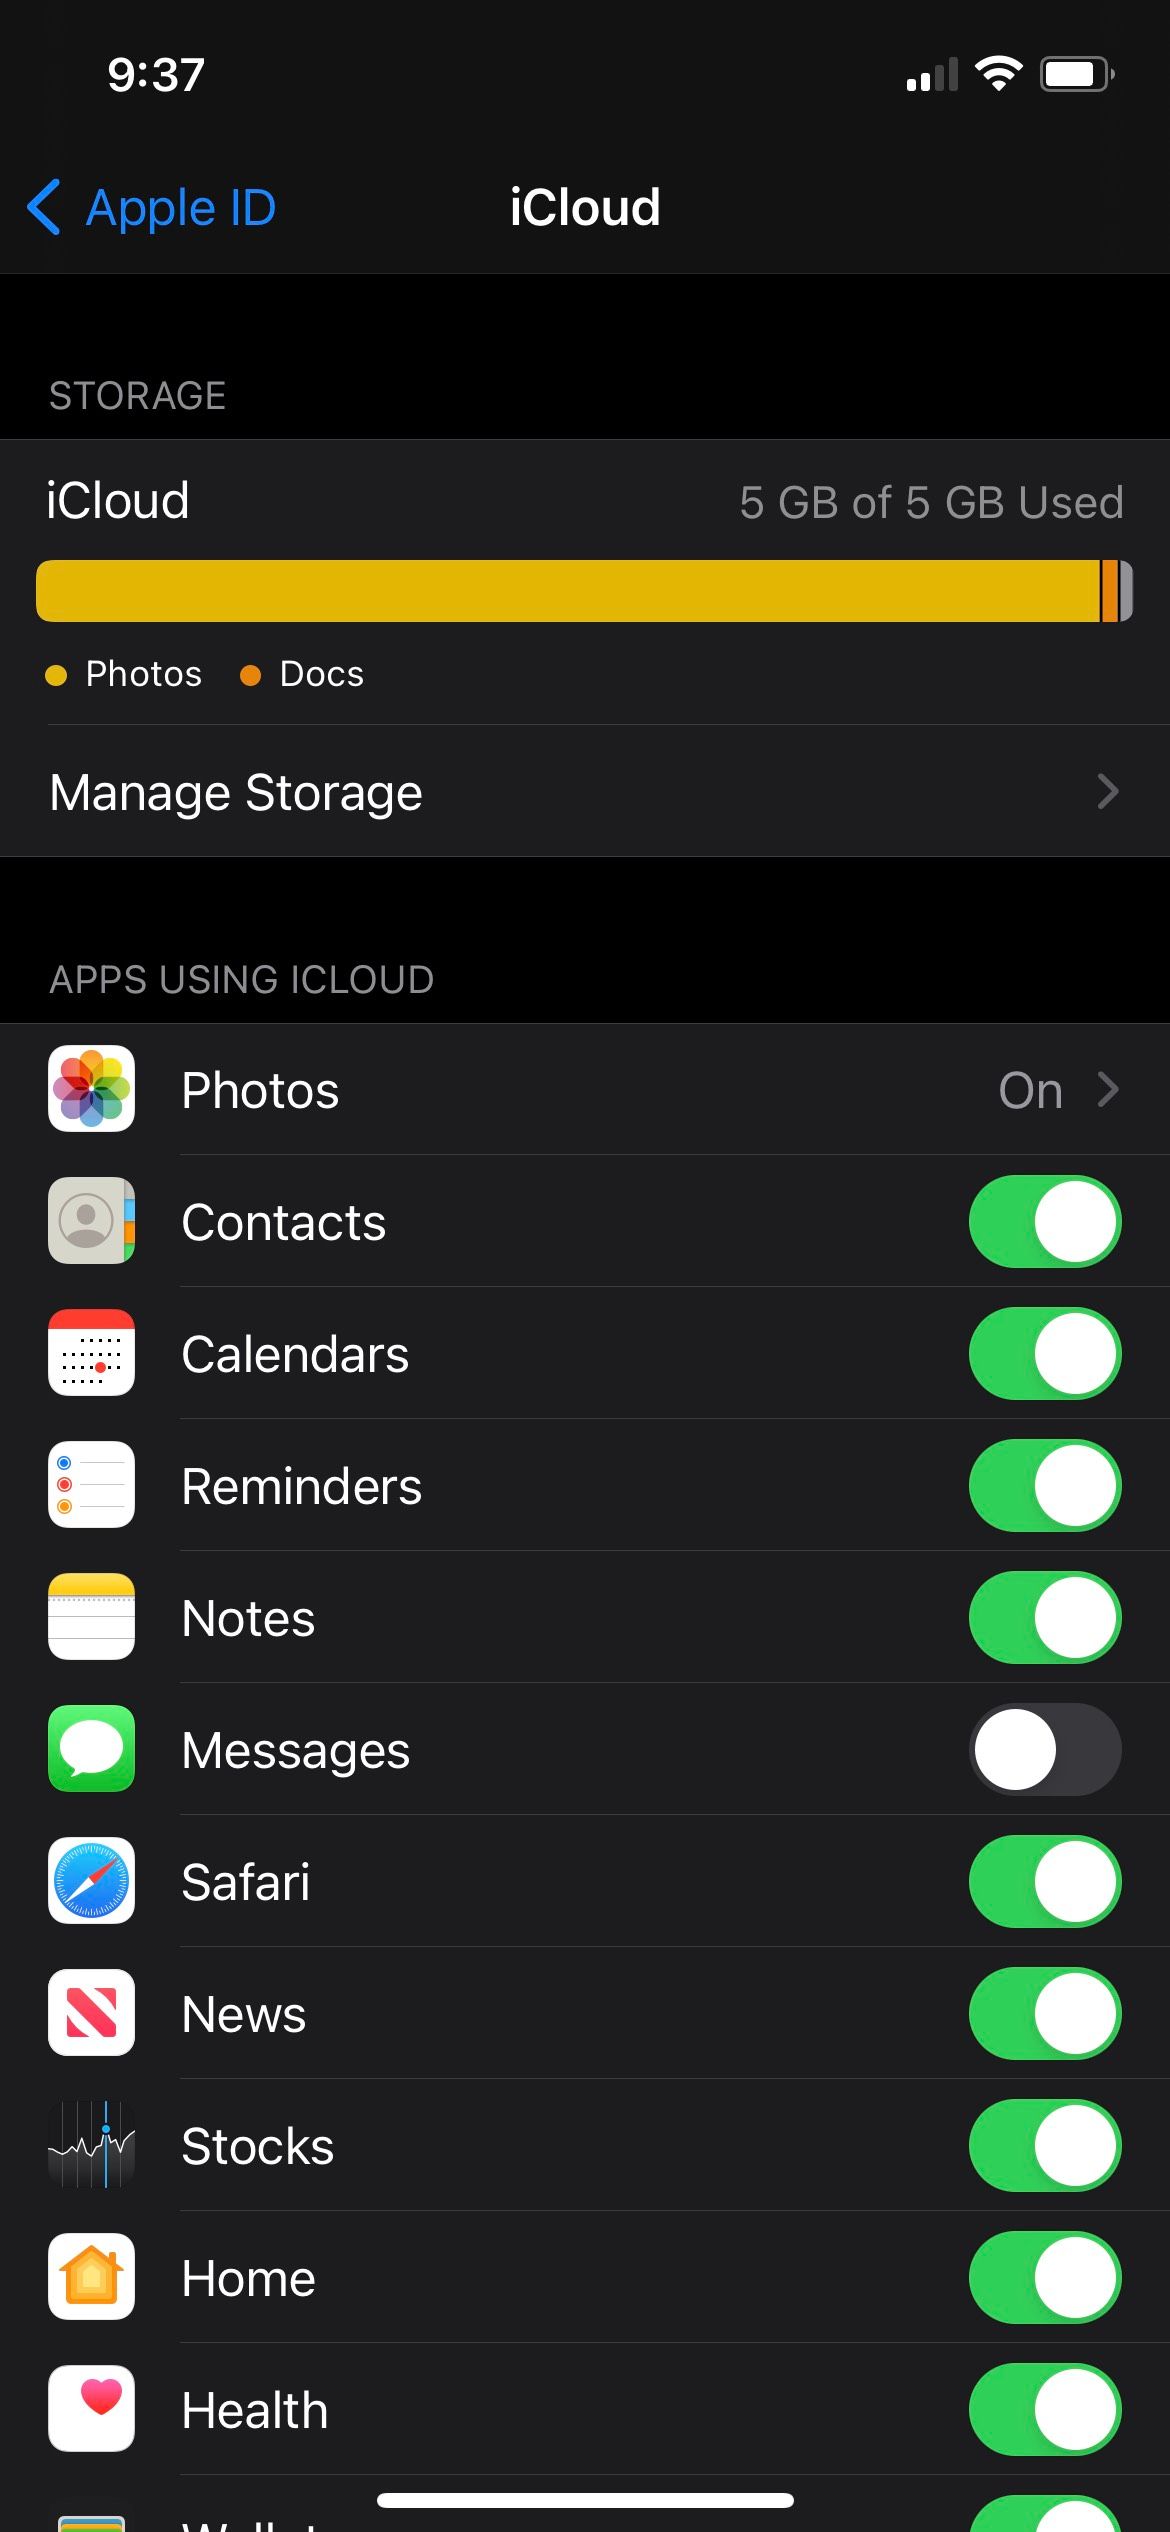 apple icloud storage plans and options